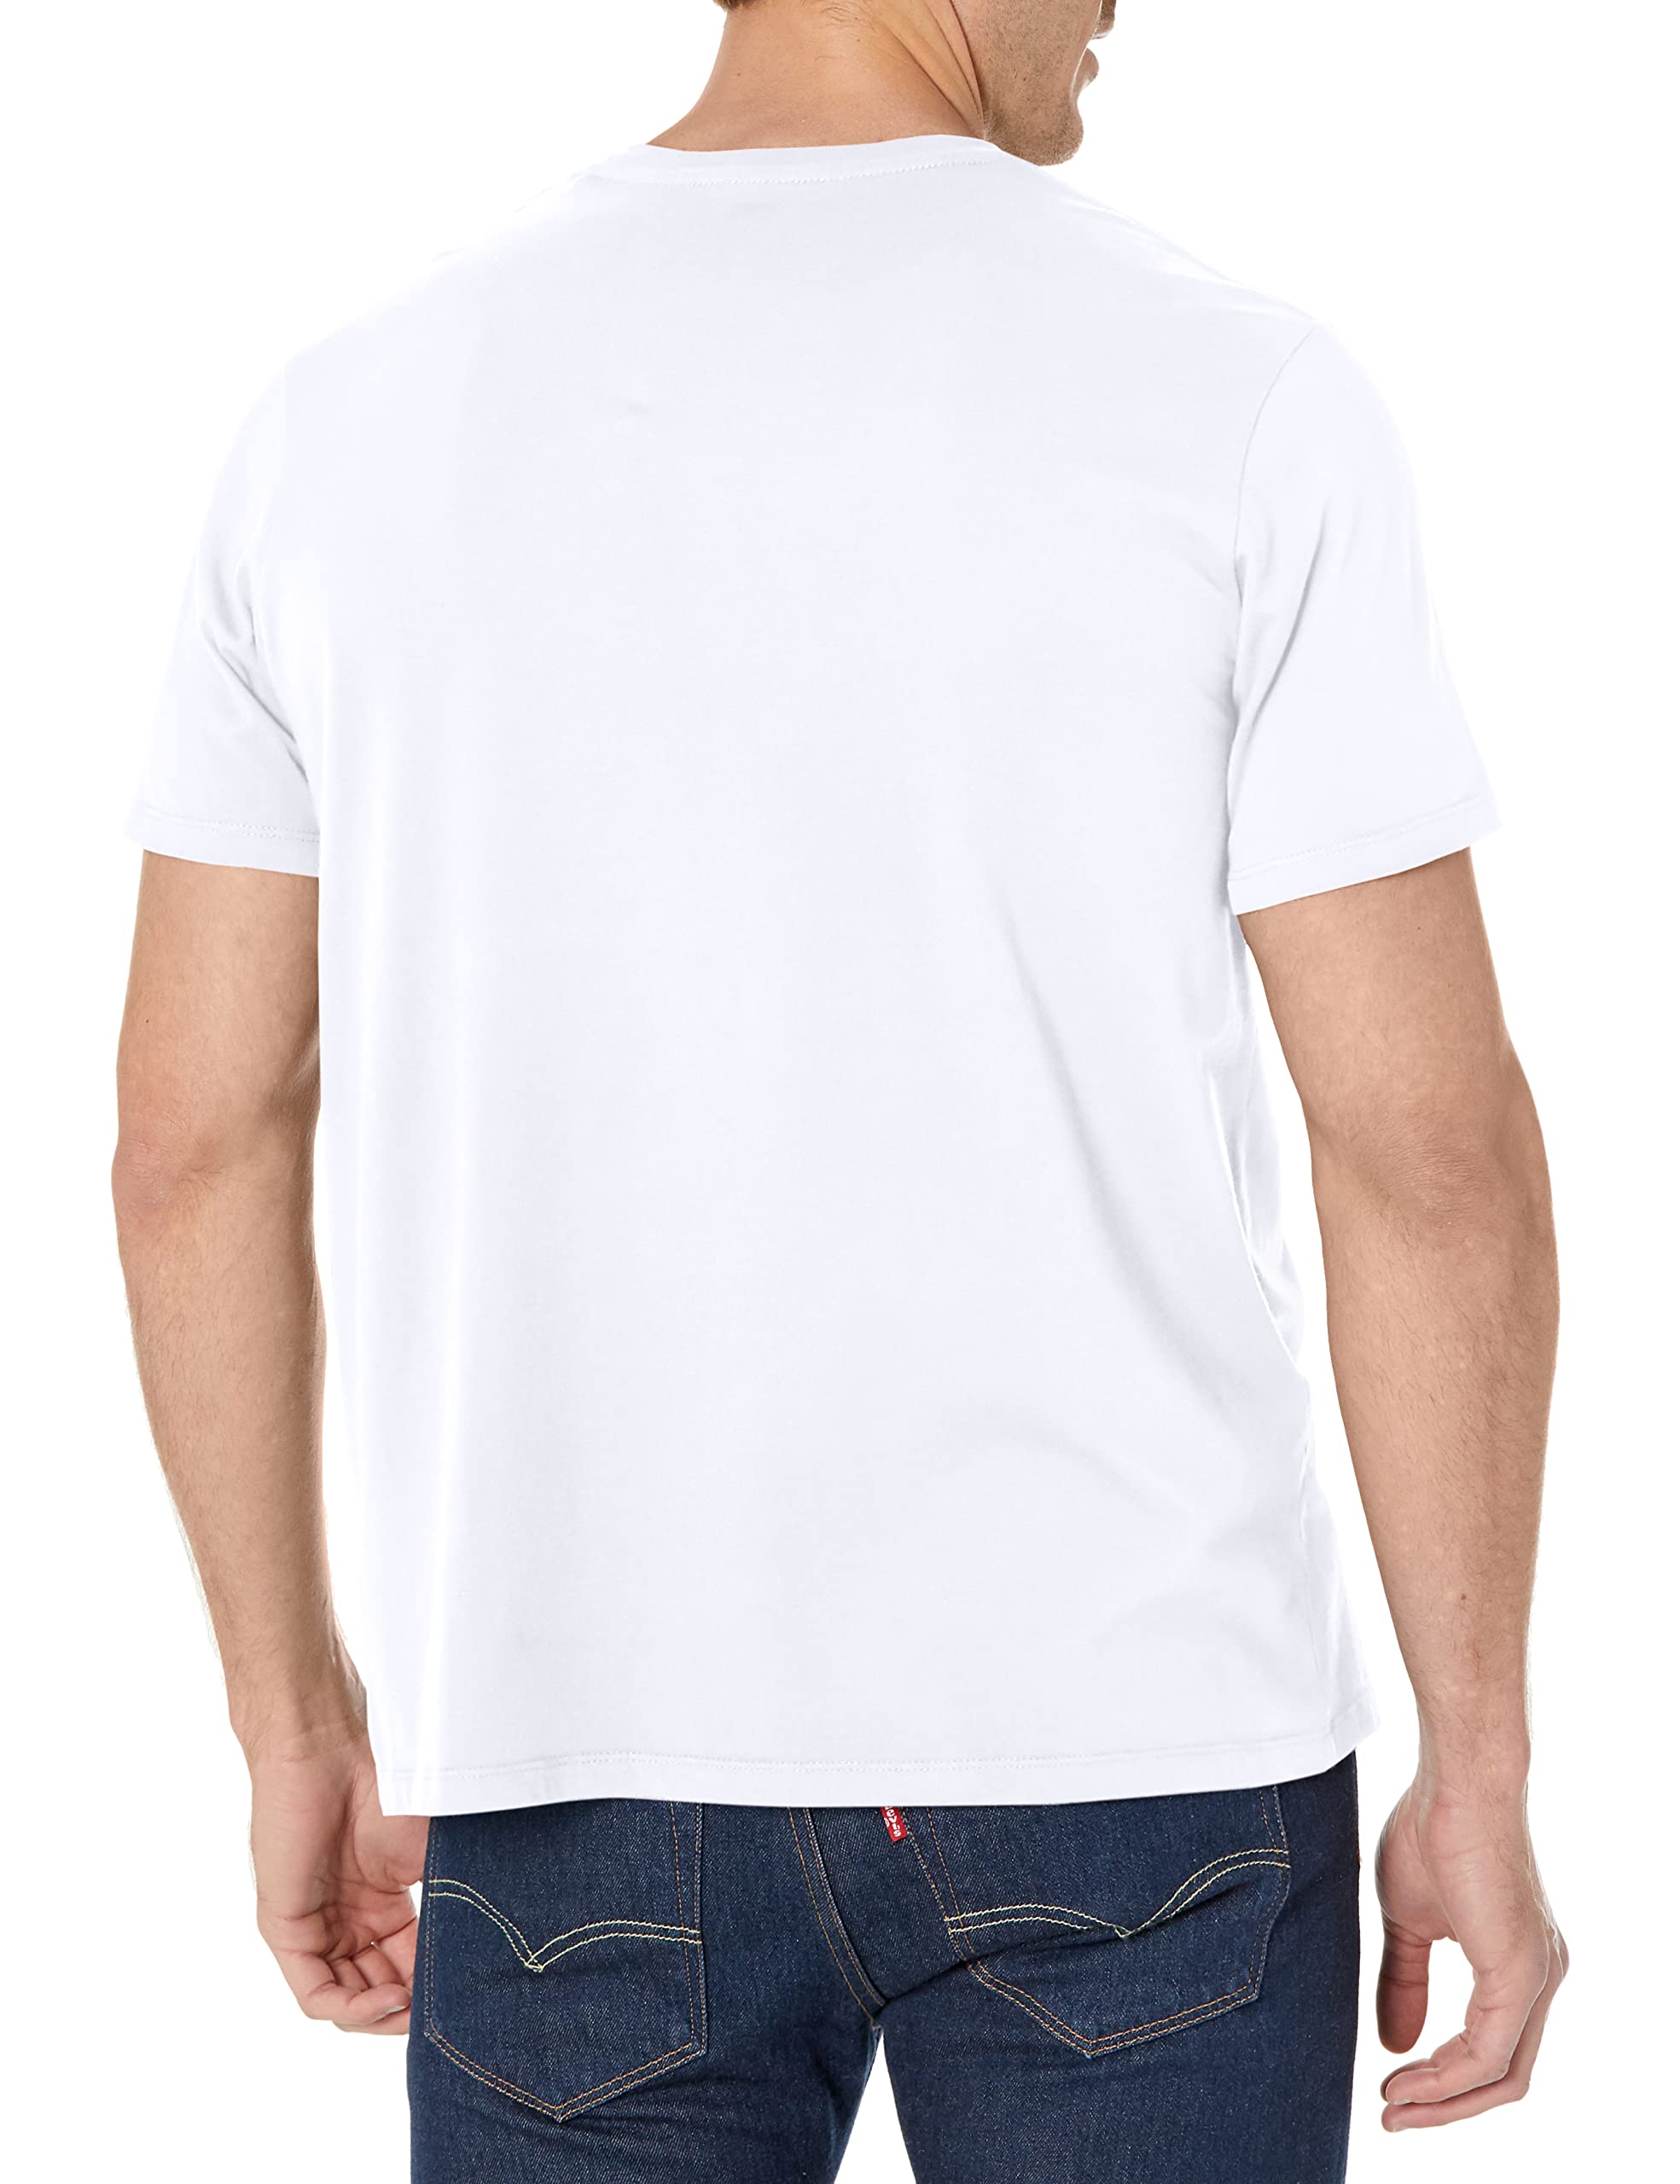 Levi's Men's Graphic Tees (Also Available in Big & Tall)